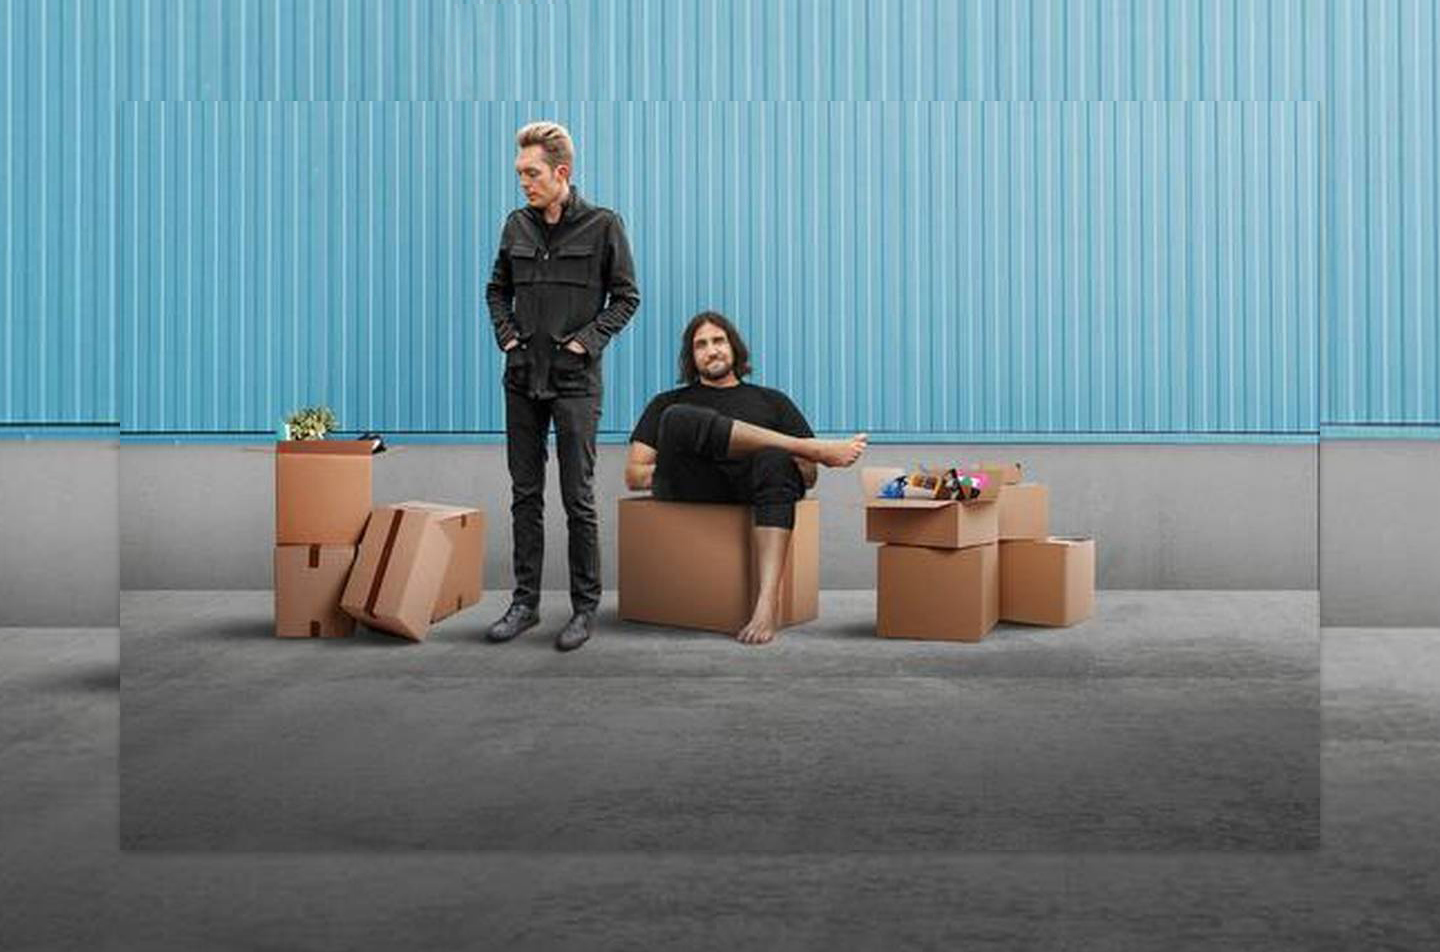 Netflix The Minimalists - Less is now